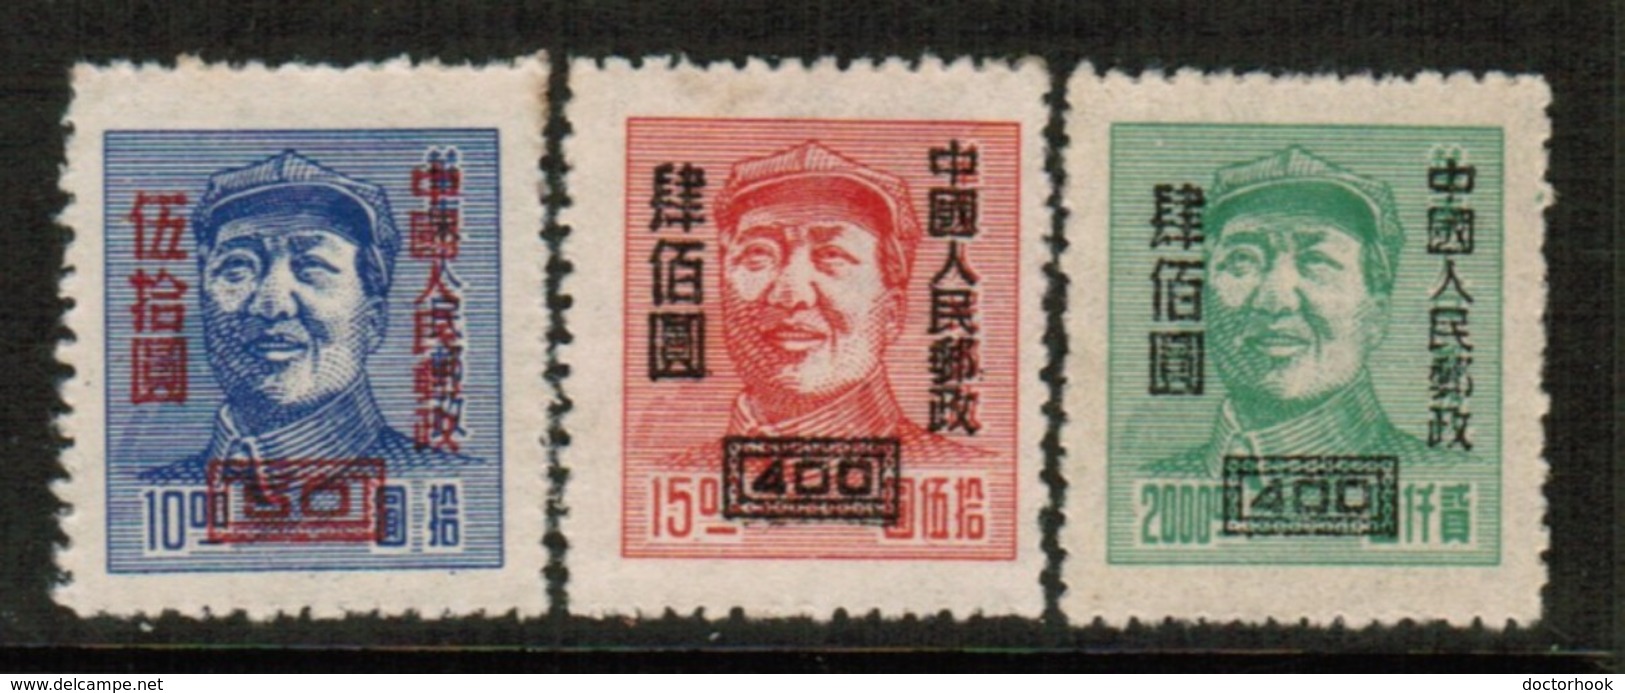 PEOPLES REPUBLIC Of CHINA  Scott # 82-4* VF UNUSED NO GUM AS ISSUED (Stamp Scan # 508) - Nuovi